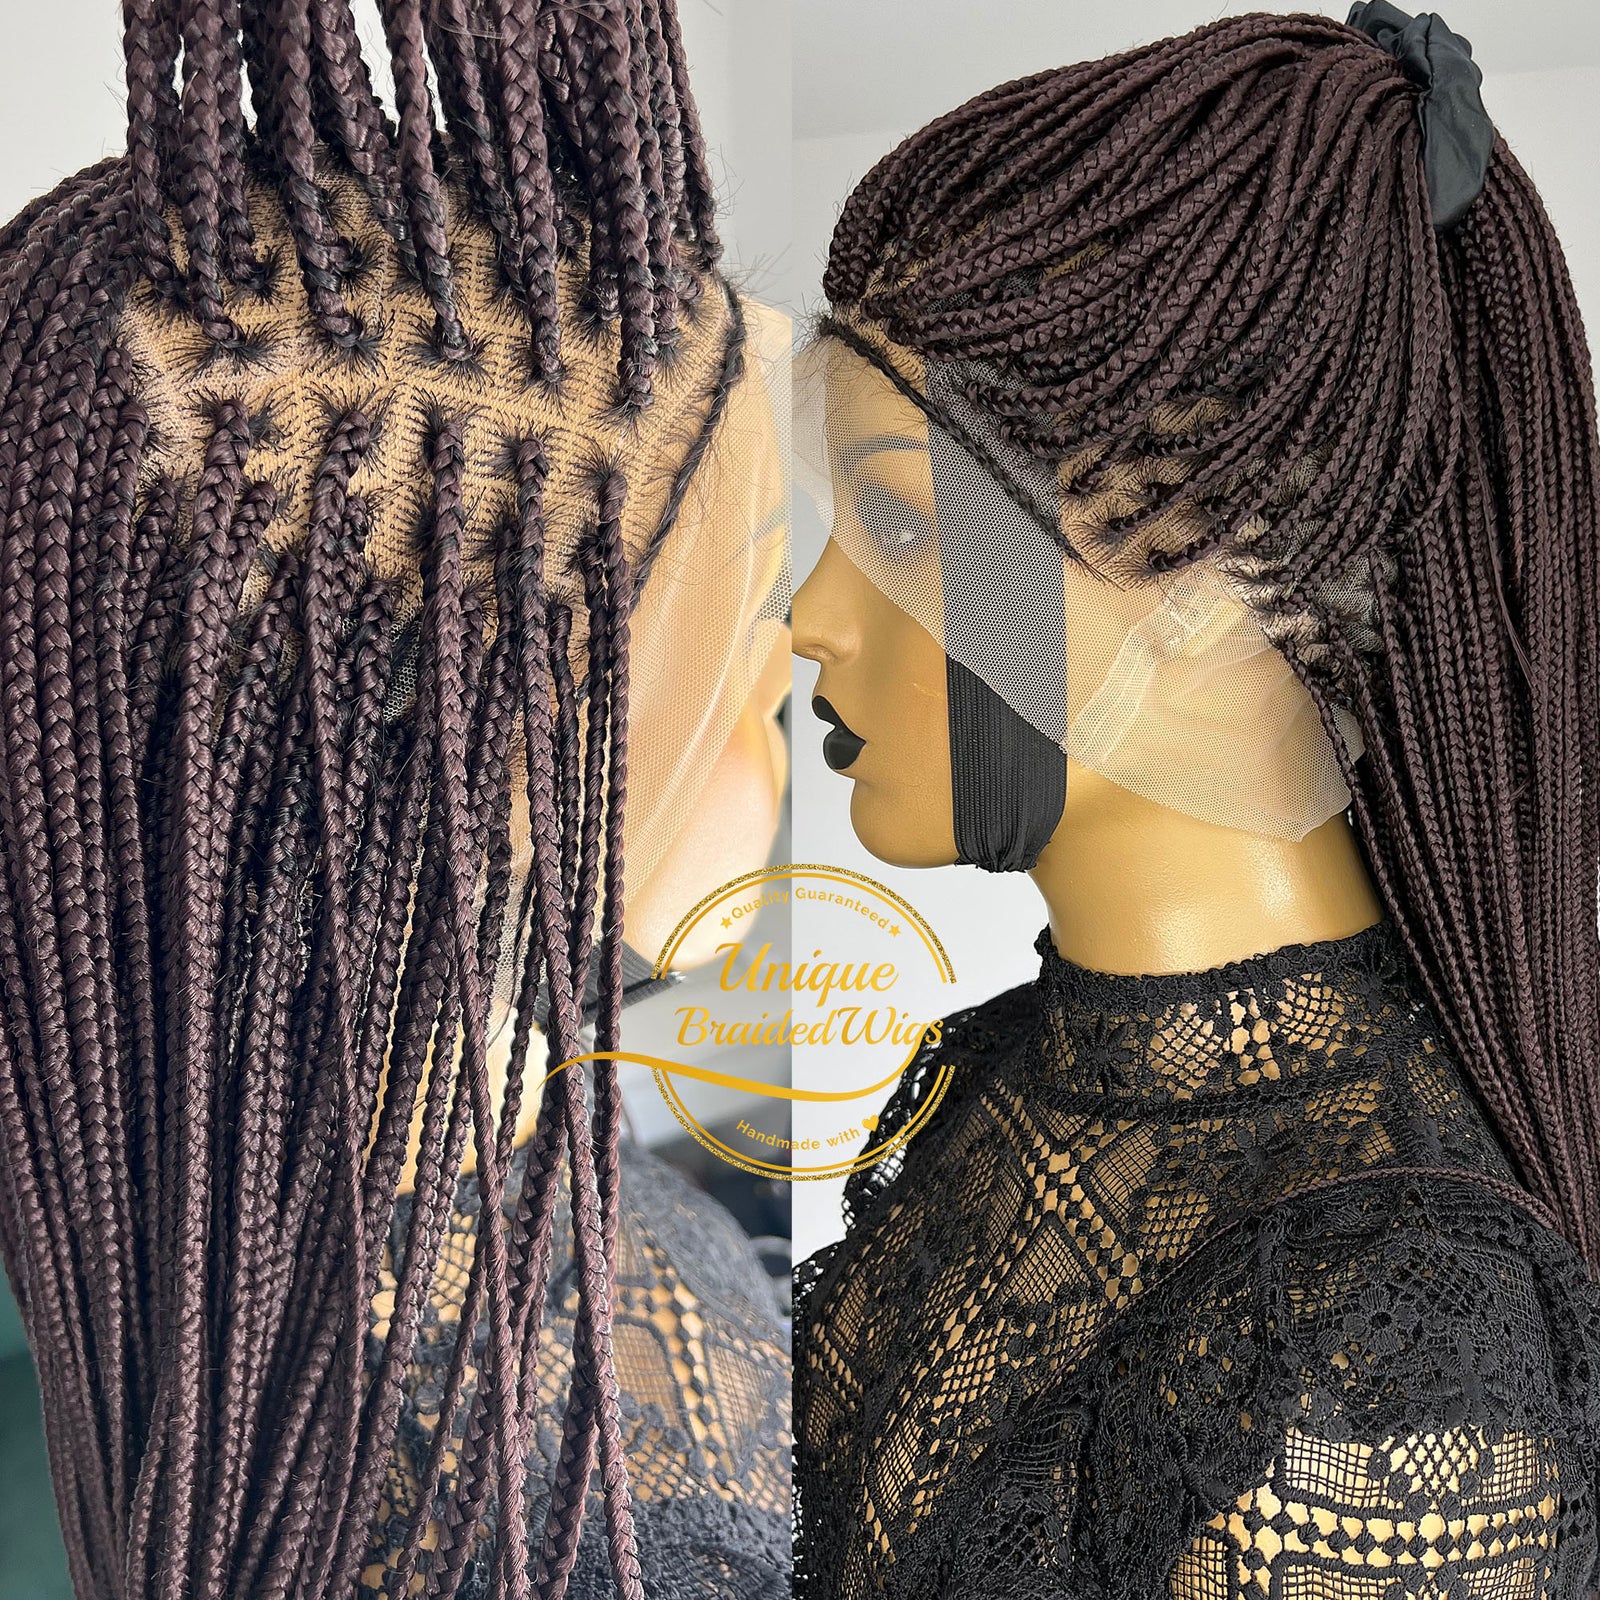 LARGE BOX BRAID FULL LACE WIG – SSChic Boutique